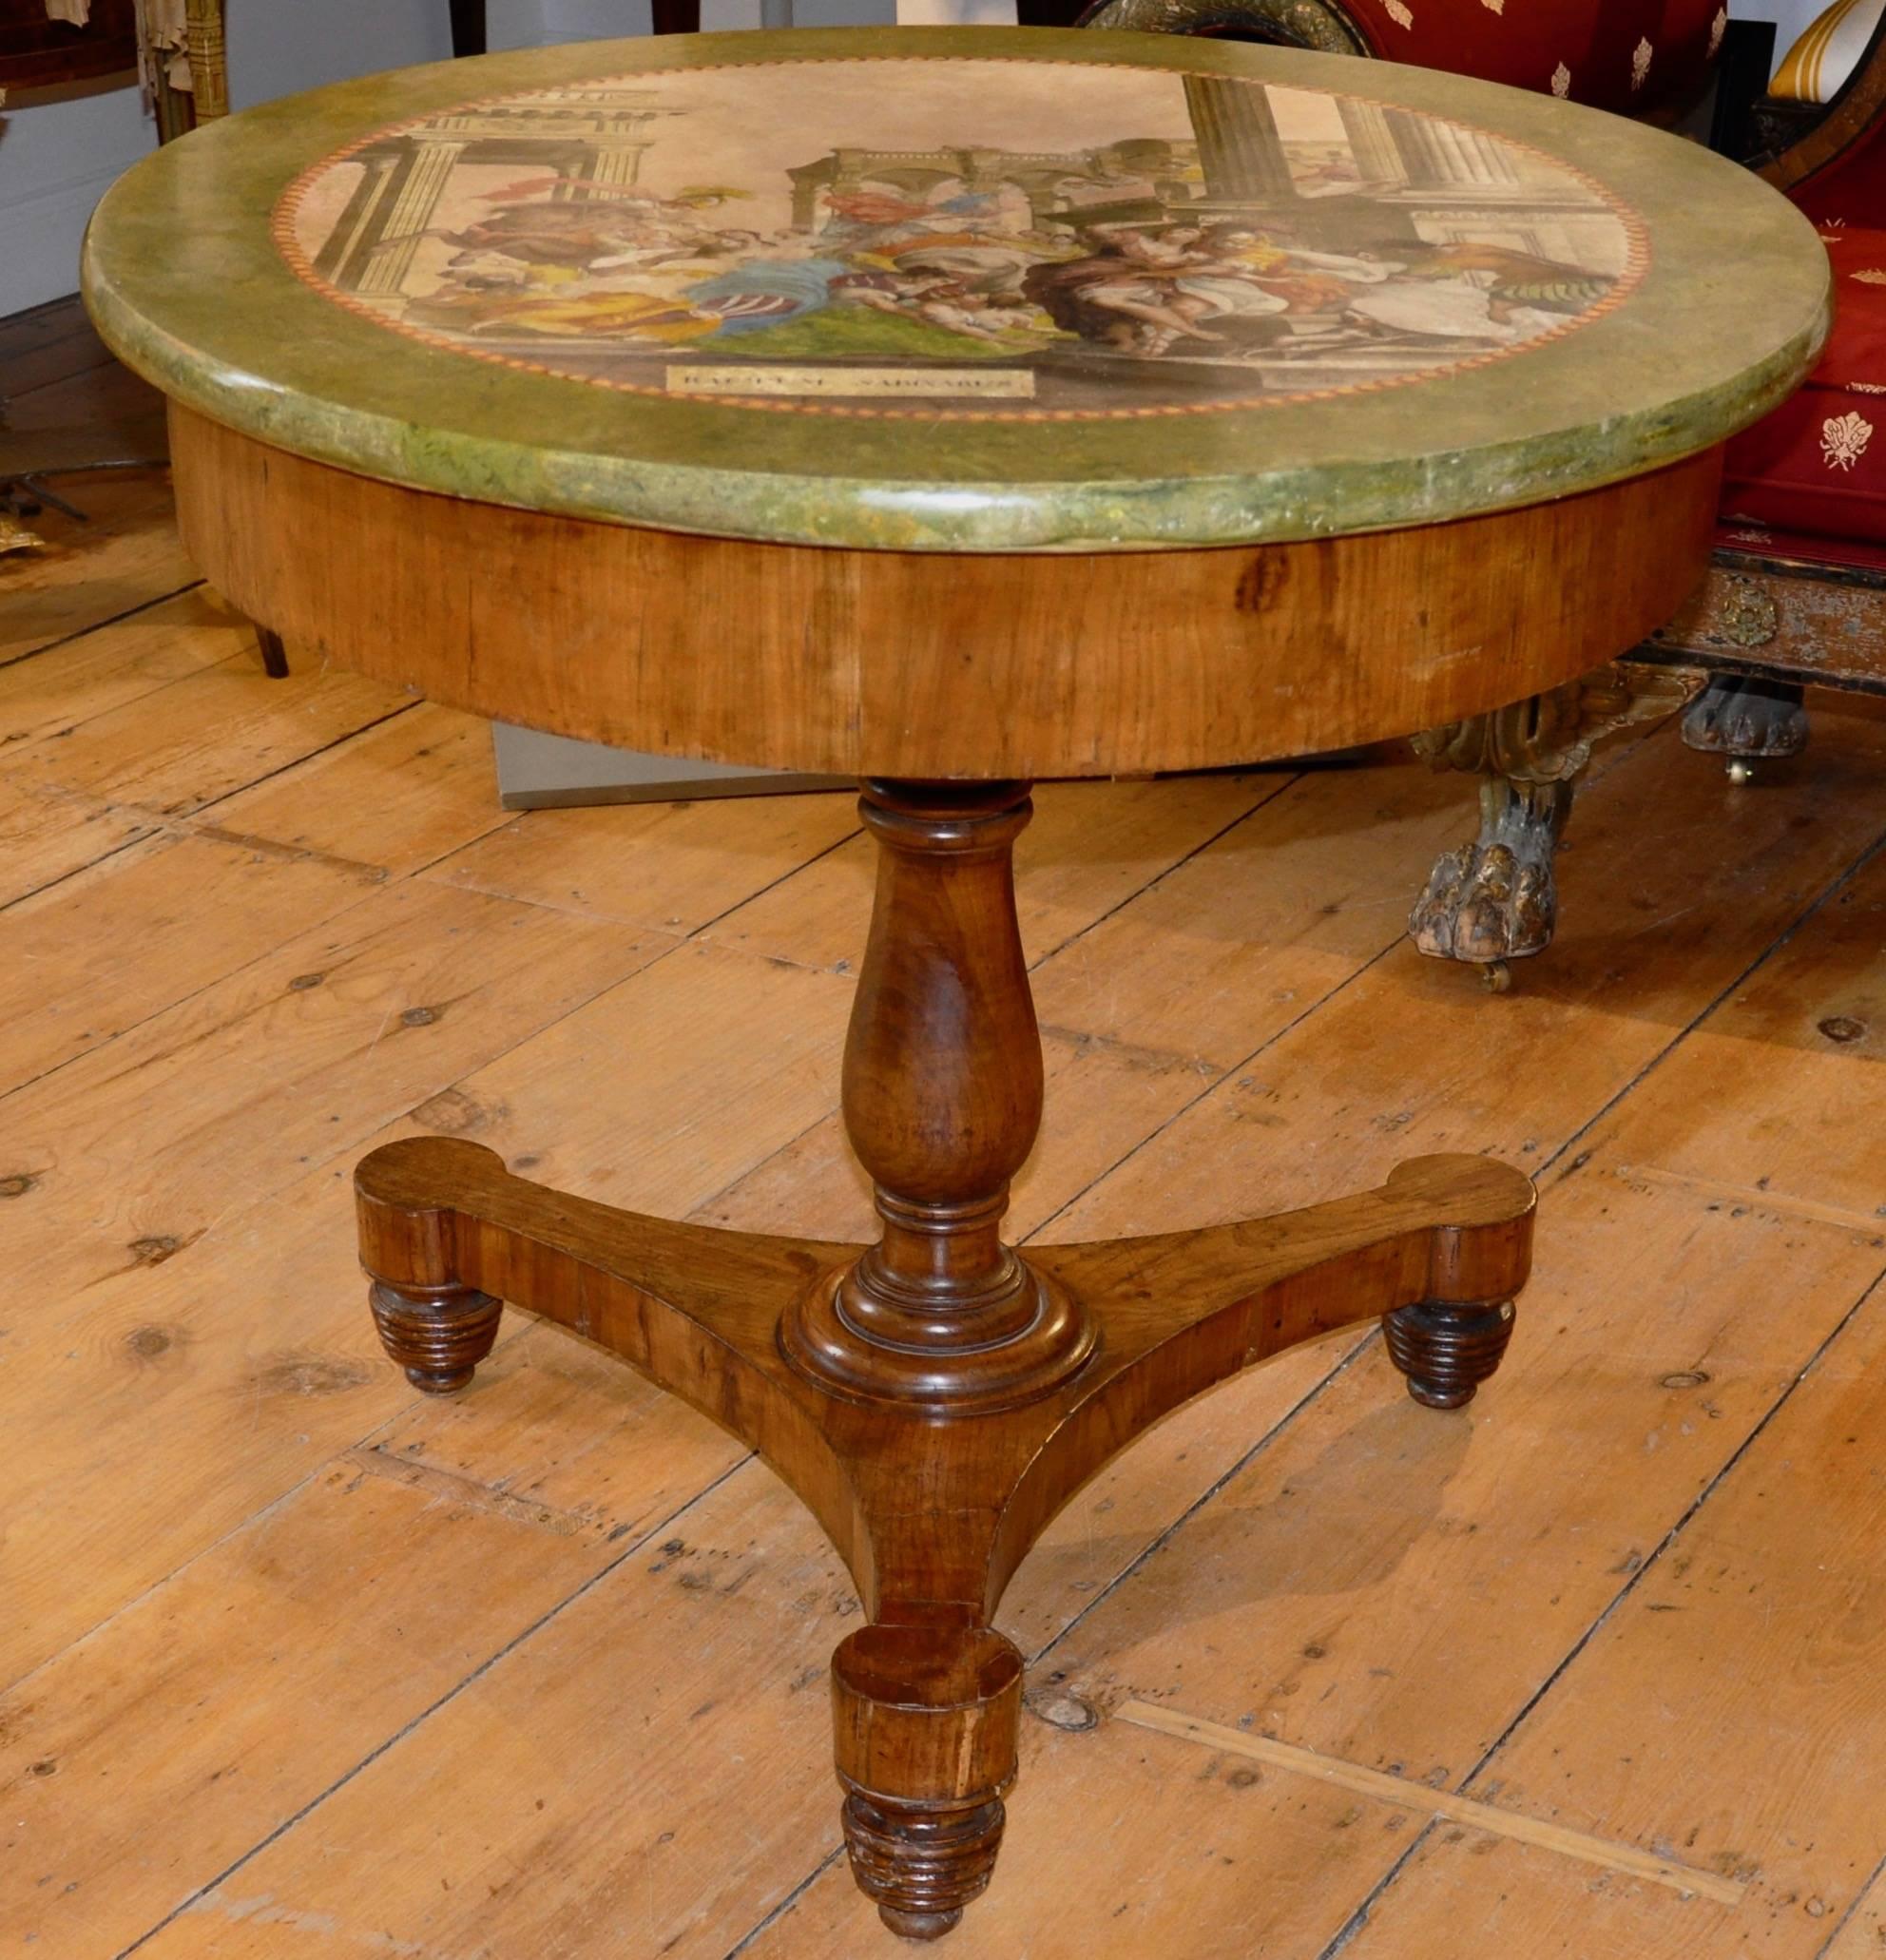 Period early 19th century Italian fruitwood gueridon or centre table with magnificent scagliola top.

- Scagliola top in fine execution of the rape of the sabines 